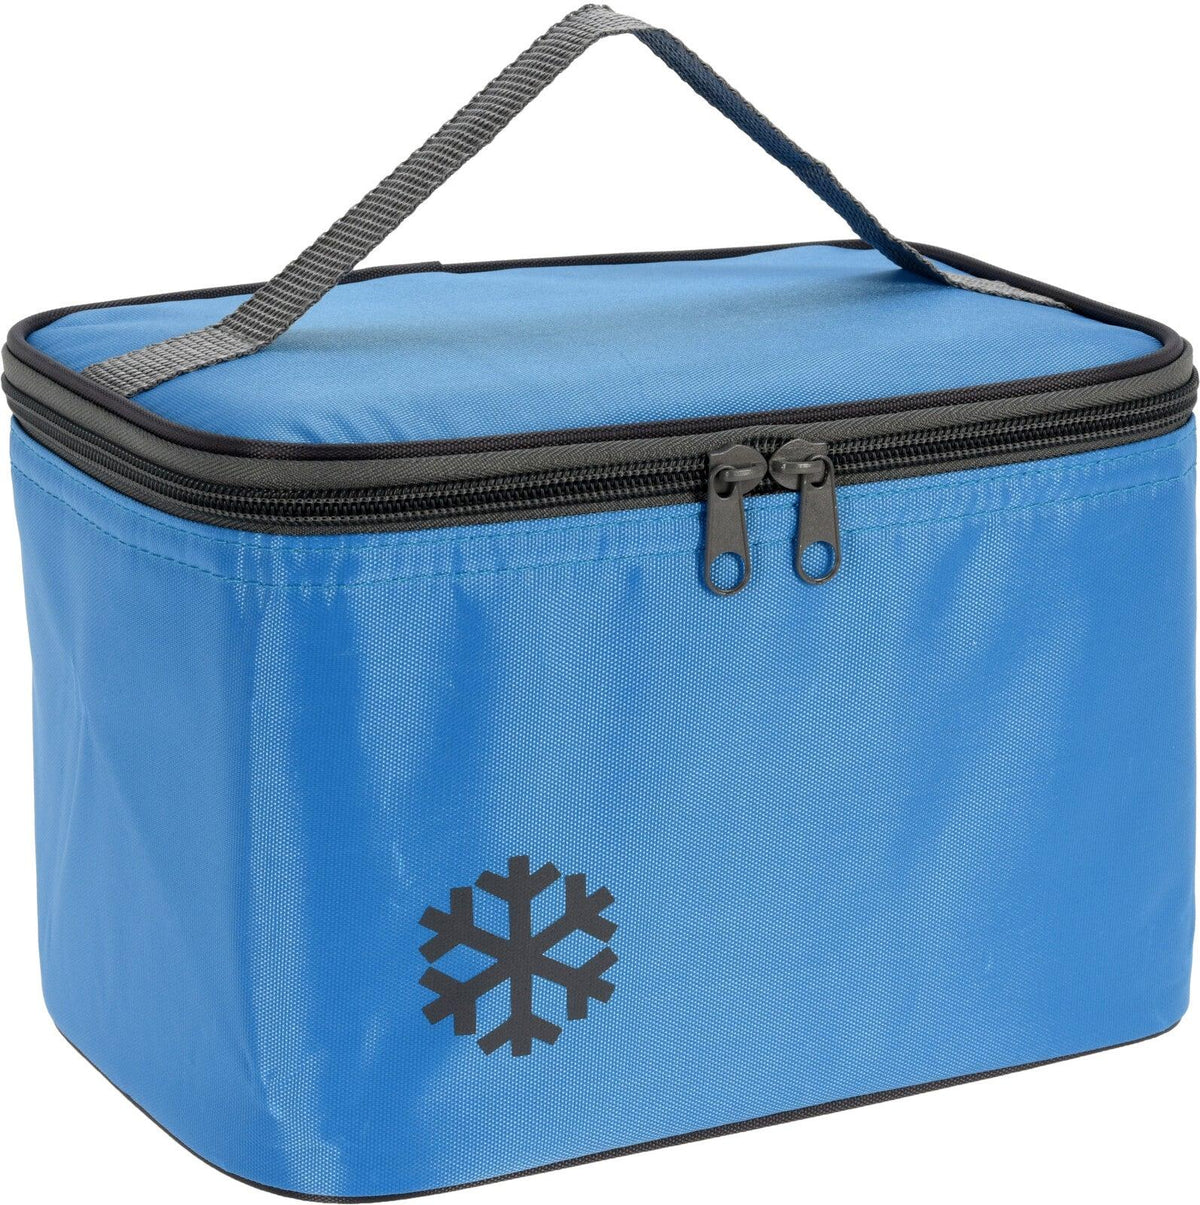 Polyester Cooler Bag | Assorted Colour | 4L - Choice Stores